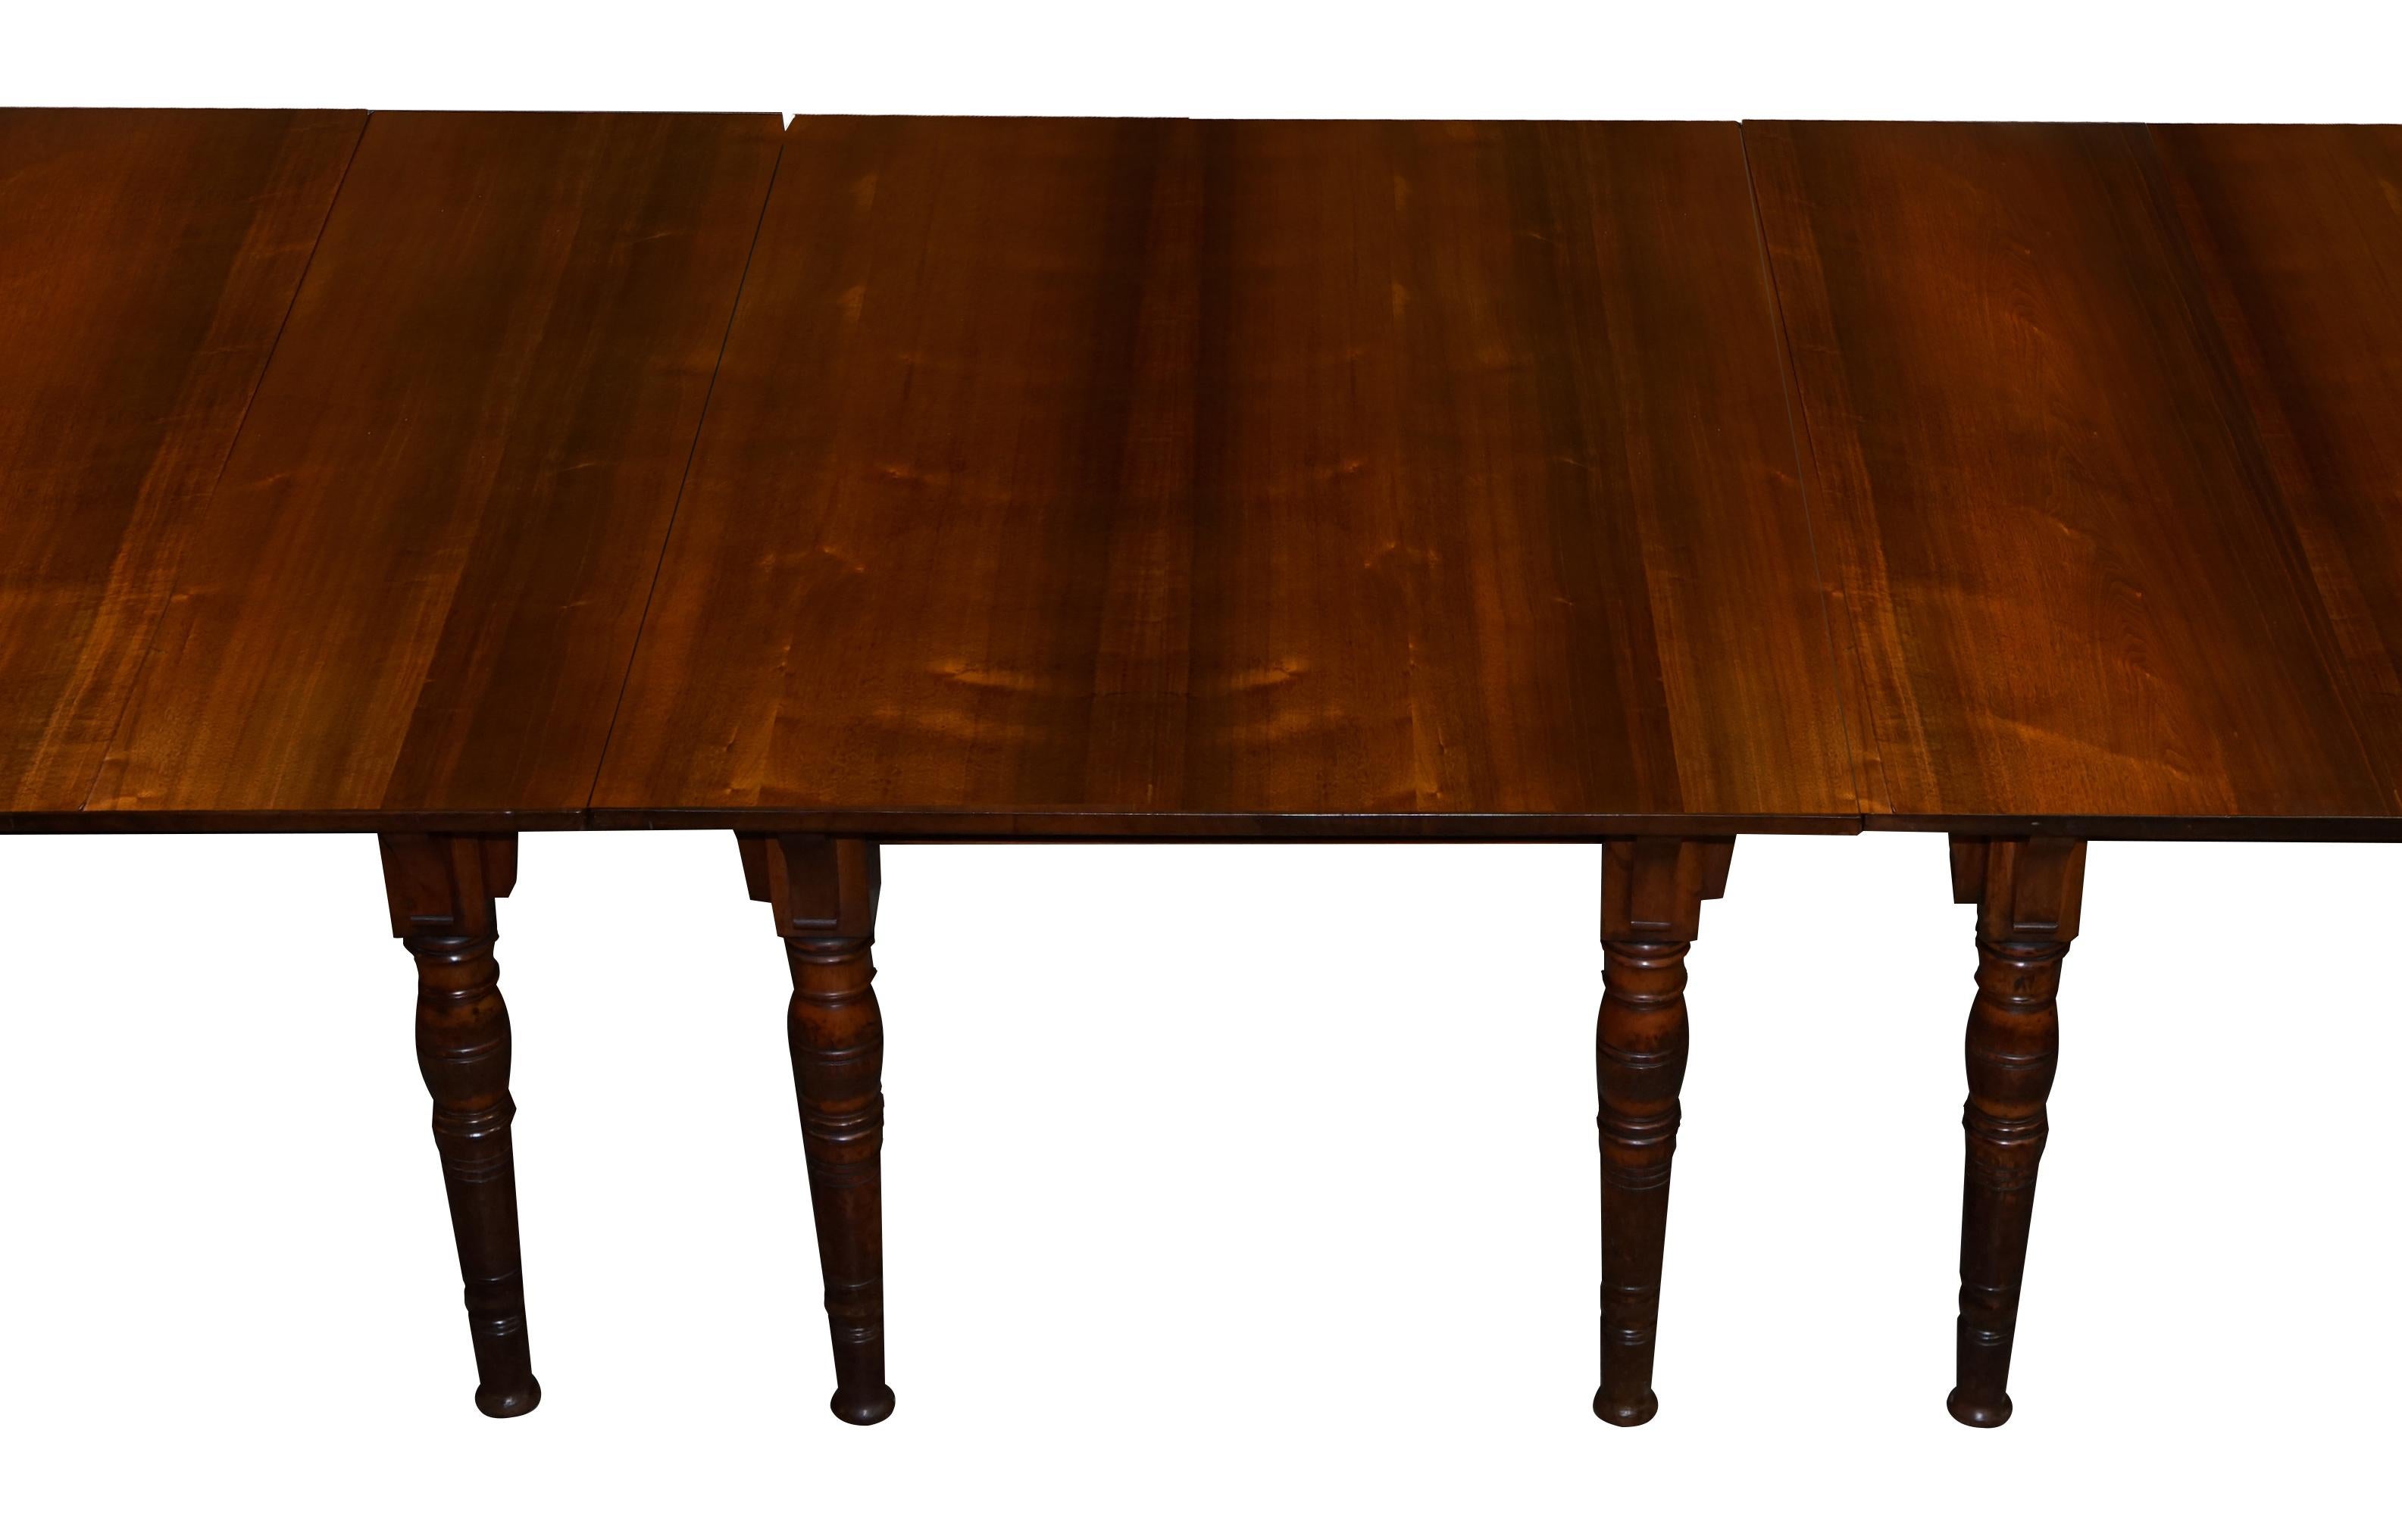 Rare Gillows Lancaster 1789-1795 George III American Walnut Dining Table For Sale 3